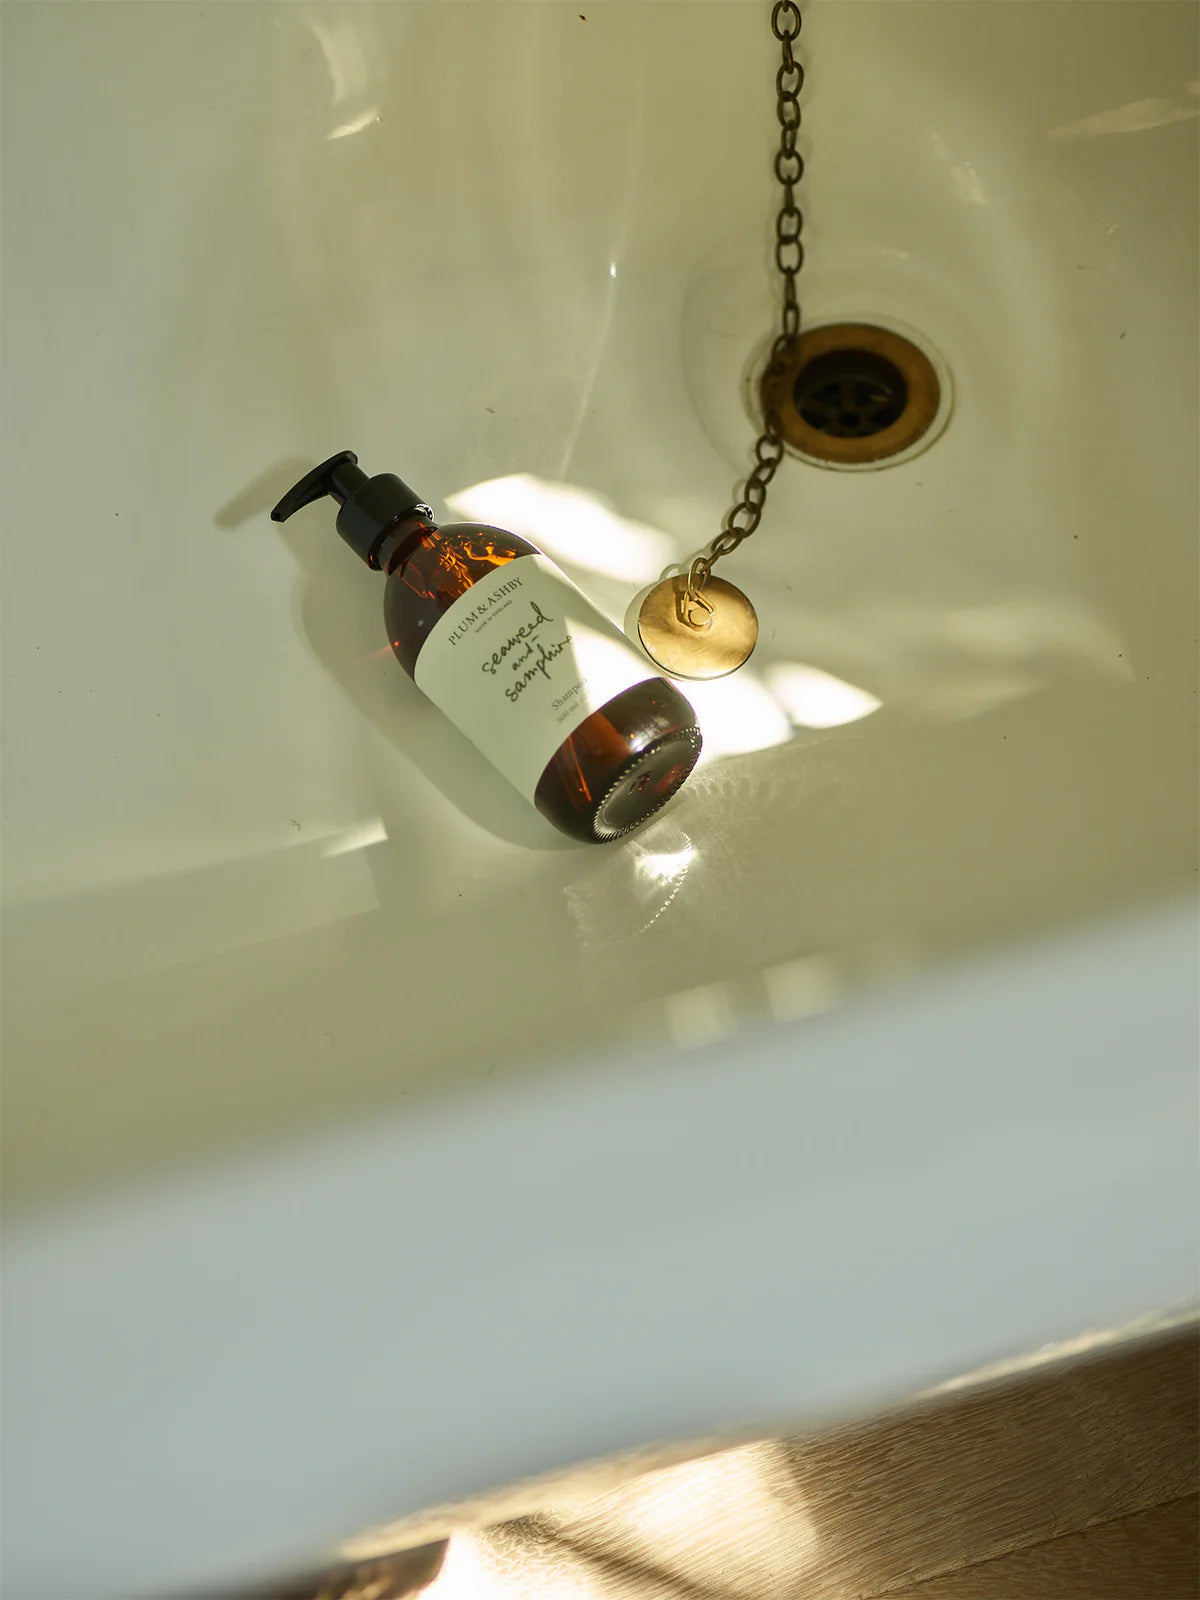 A bath and plug hole with a dark brown glass bottle, black pump dispensers, white label with sage green writing, seaweed and samphire shampoo by Plum and Ashby